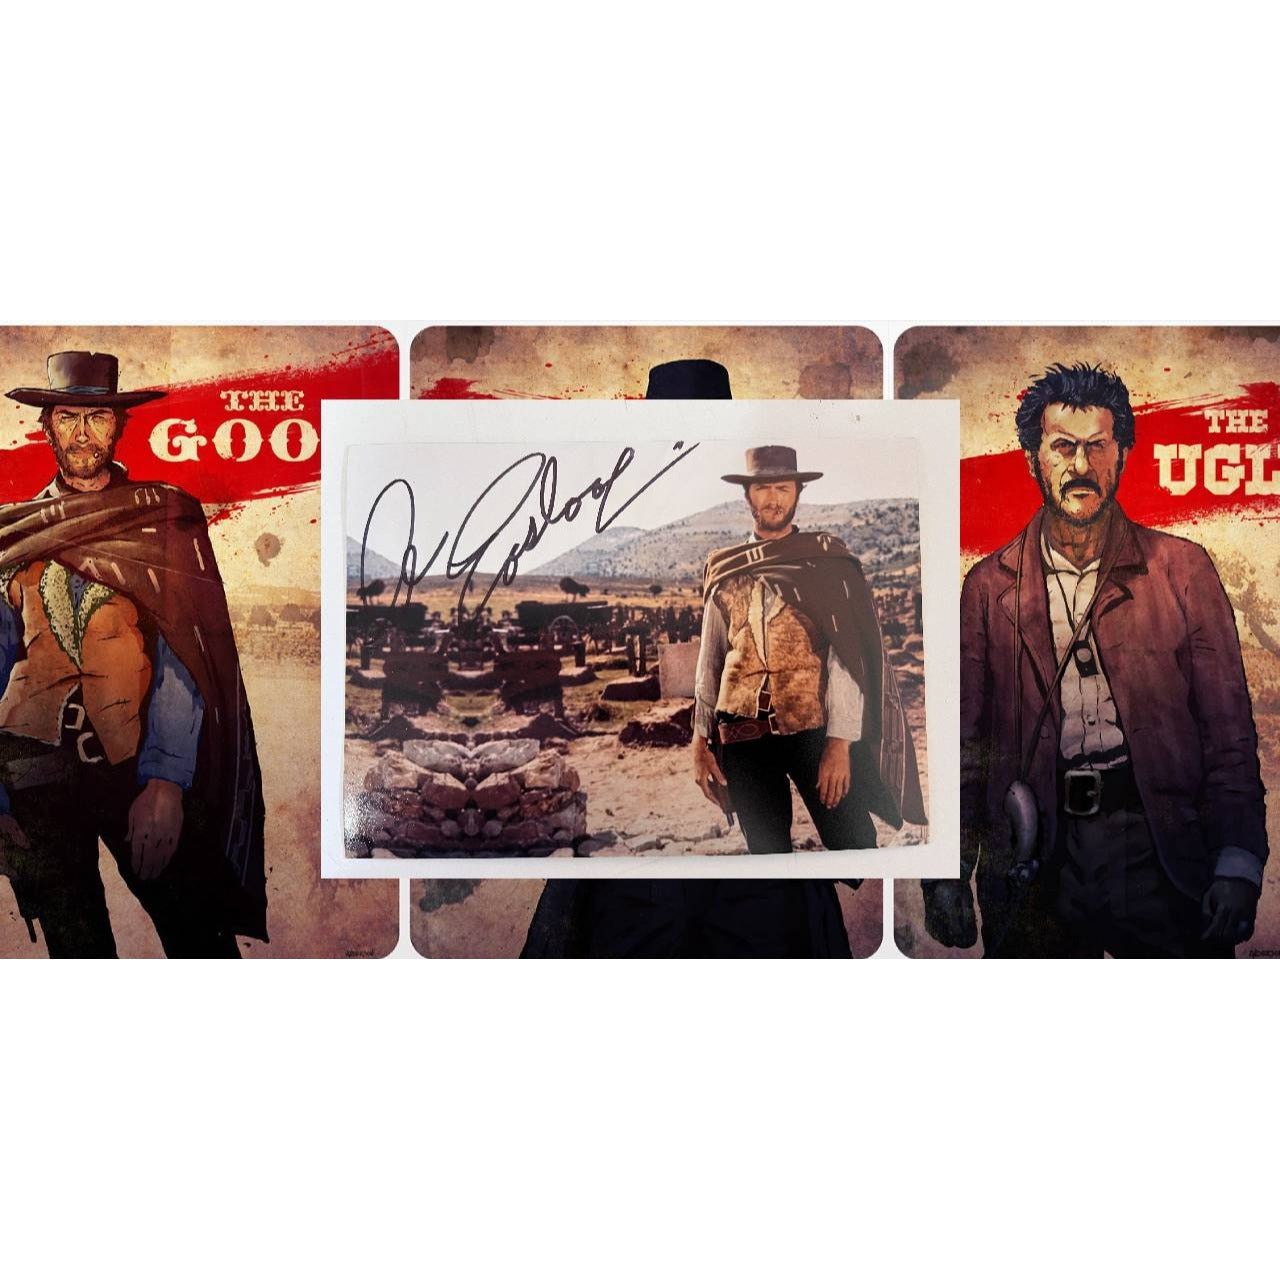 Clint Eastwood "The Good The Bad and The Ugly" 5x7 photo signed with proof